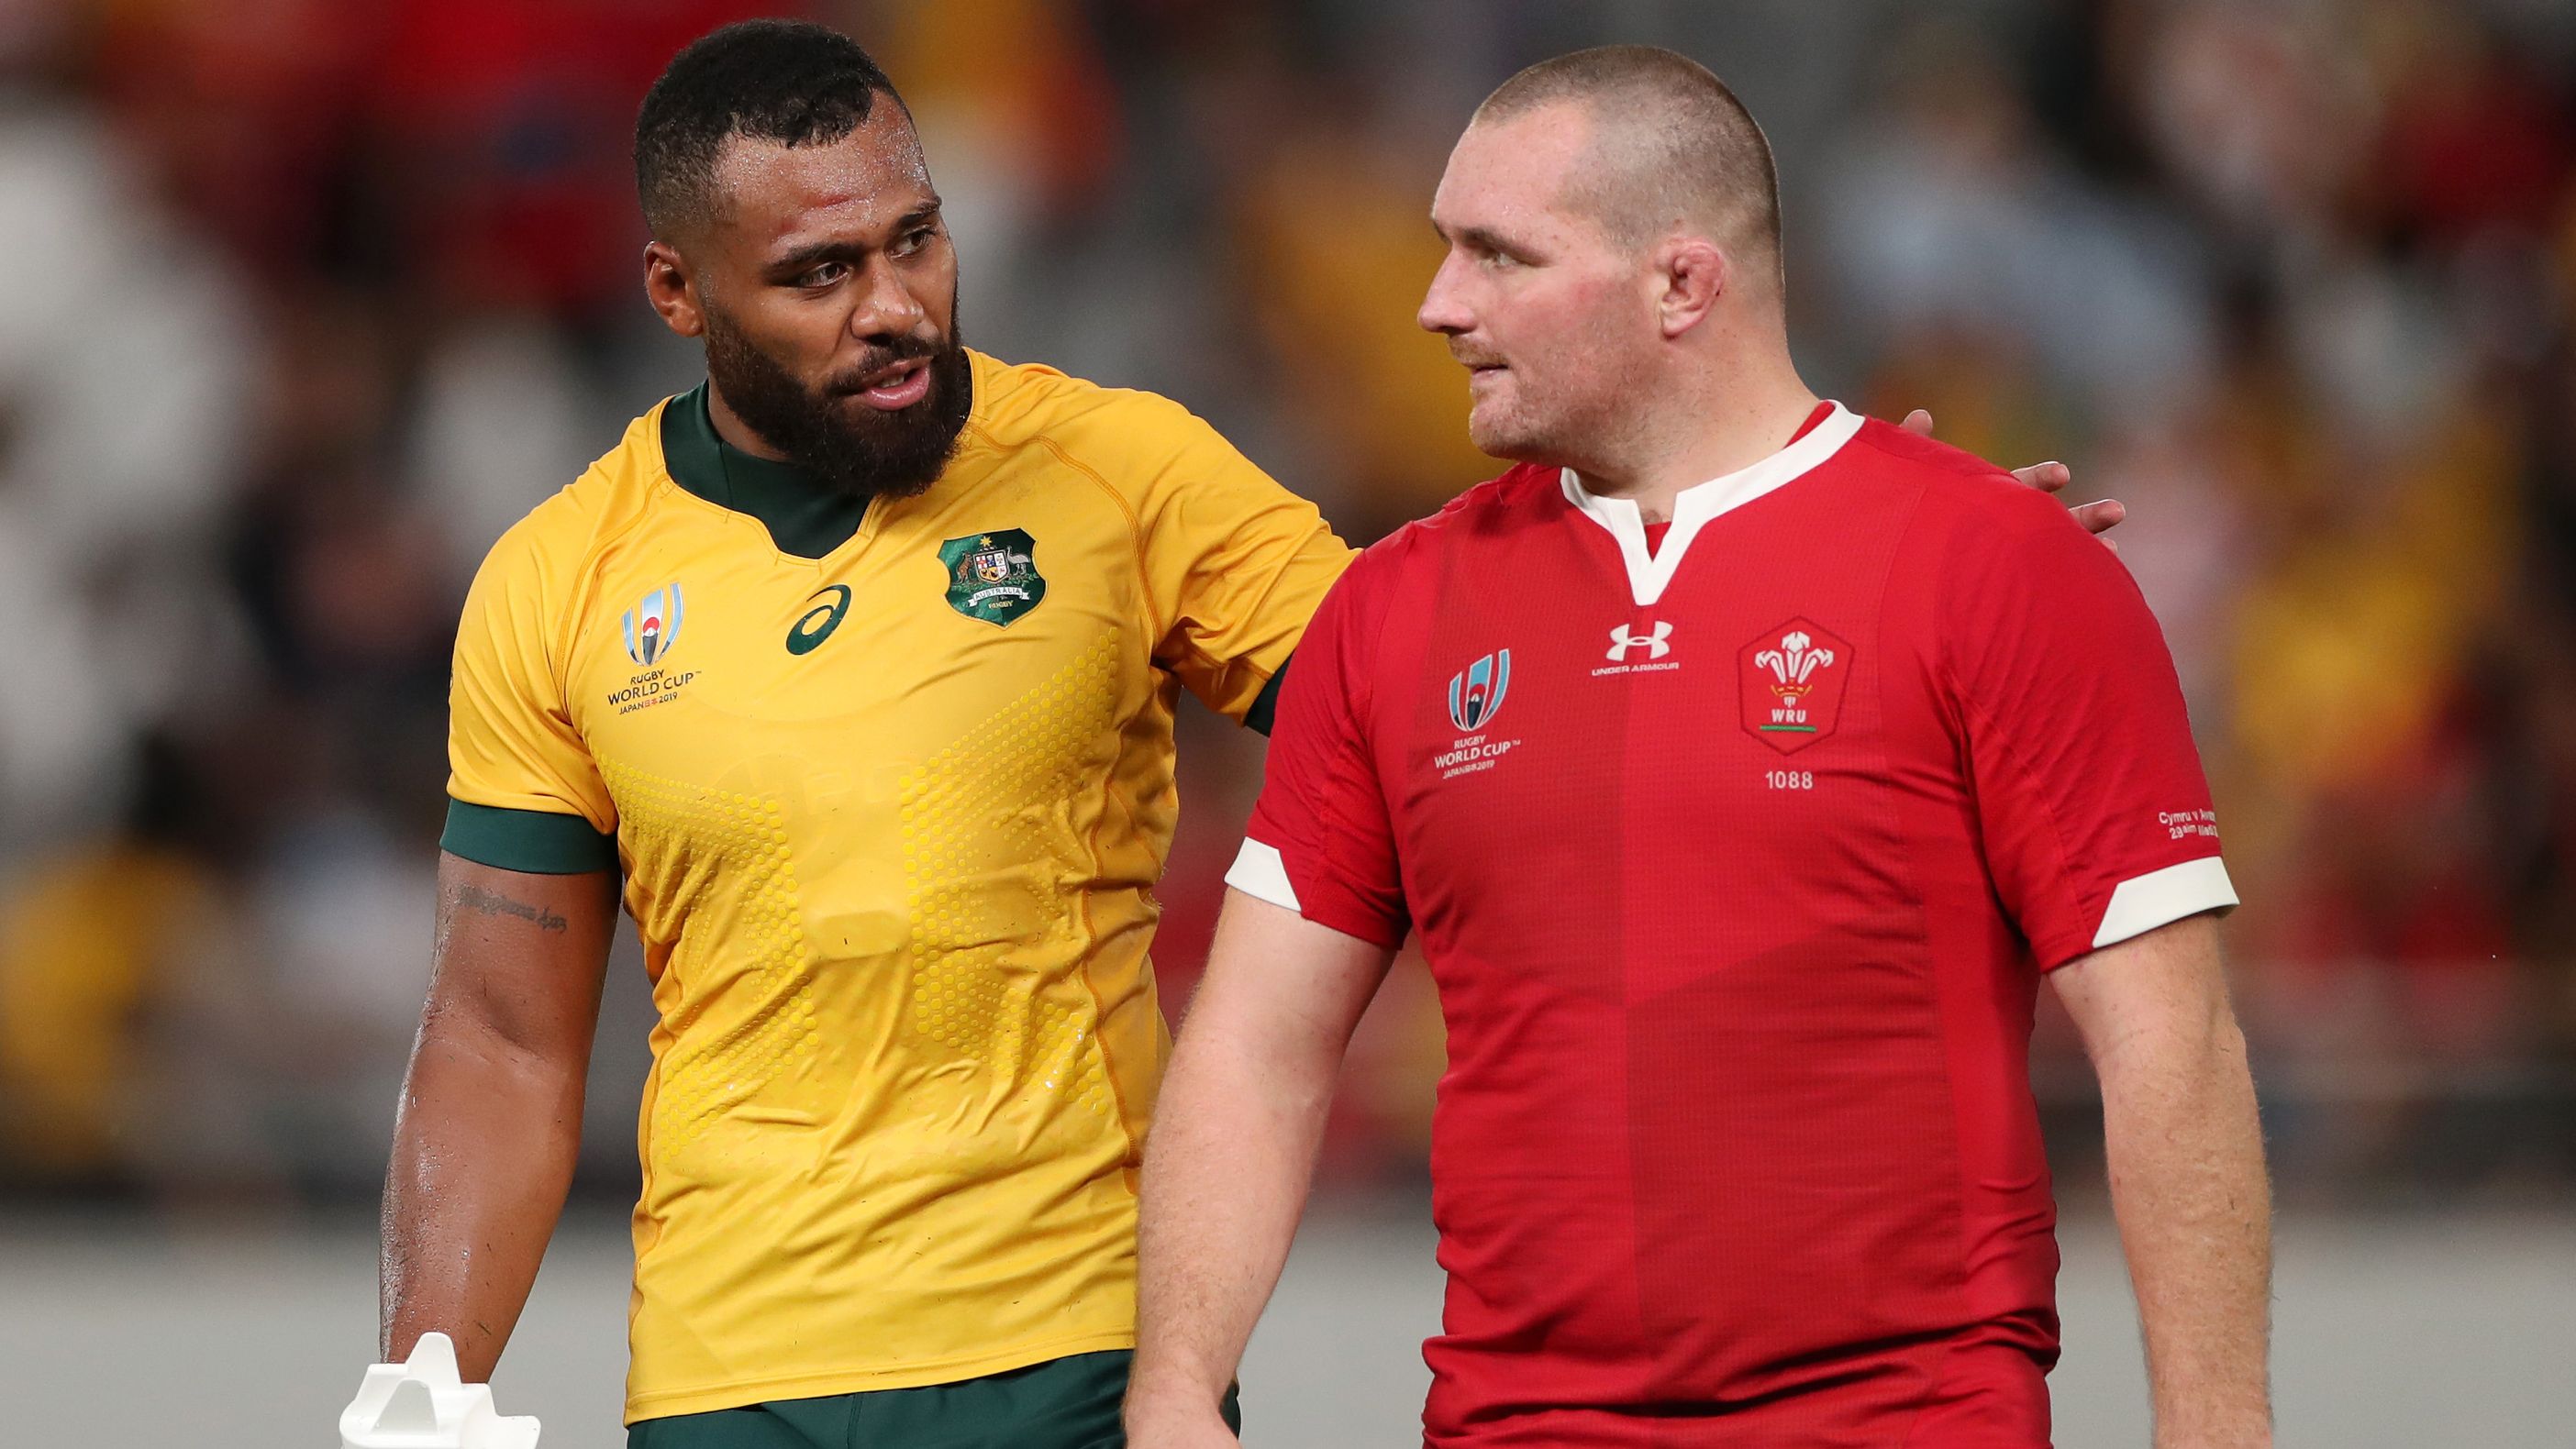 Samu Kerevi of Australia speaks with Ken Owens of Wales at the 2019 Rugby World Cup.